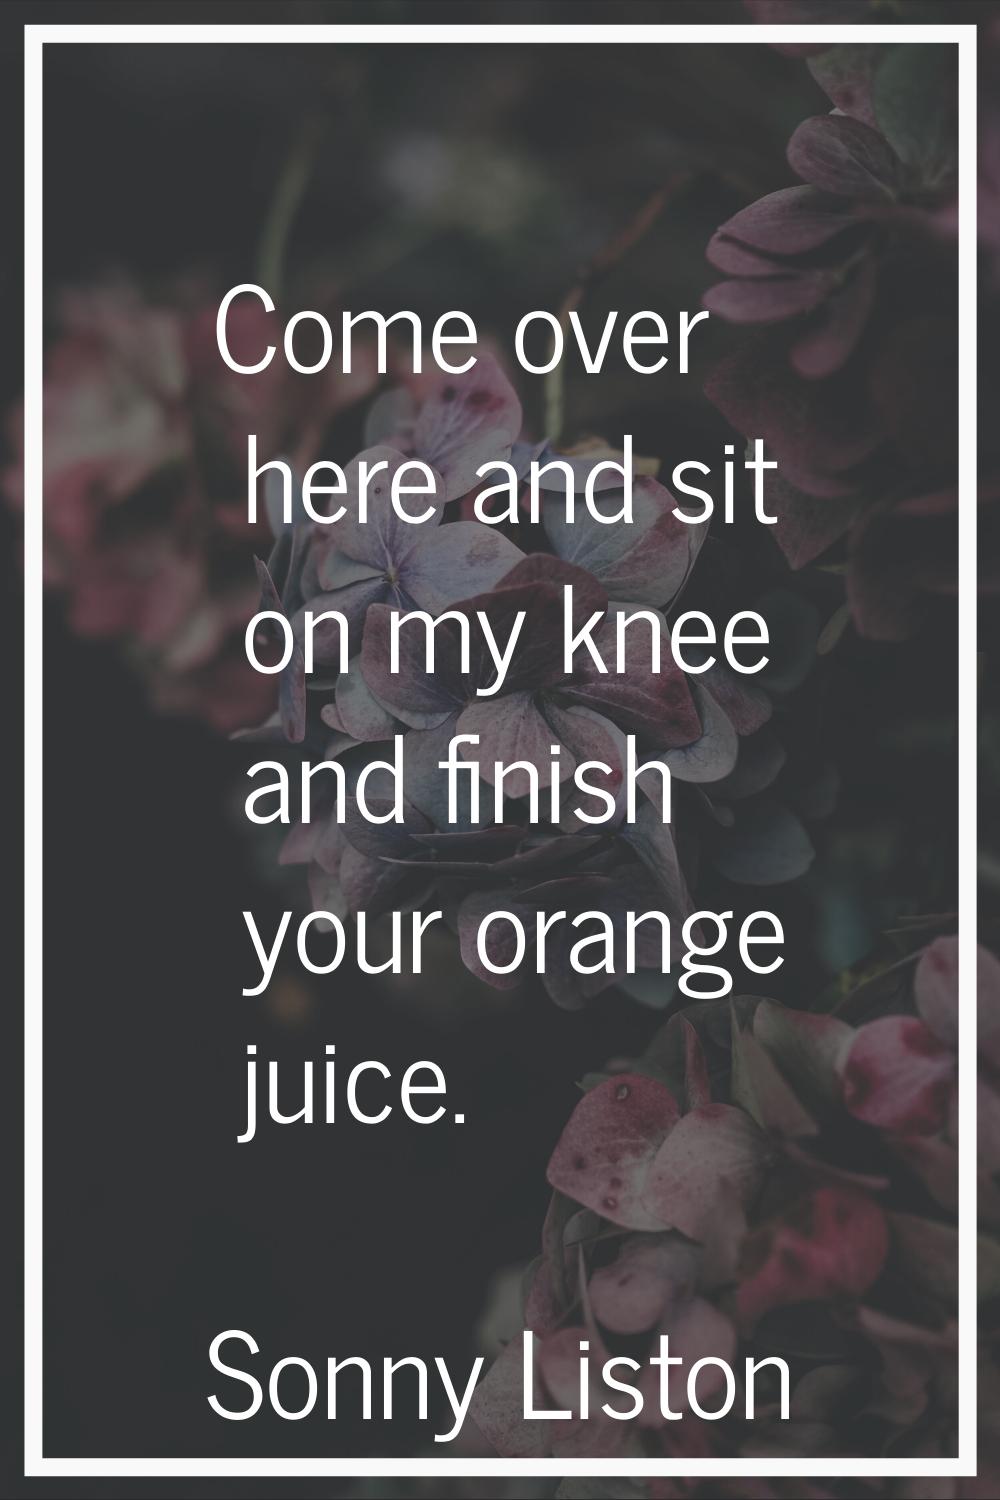 Come over here and sit on my knee and finish your orange juice.